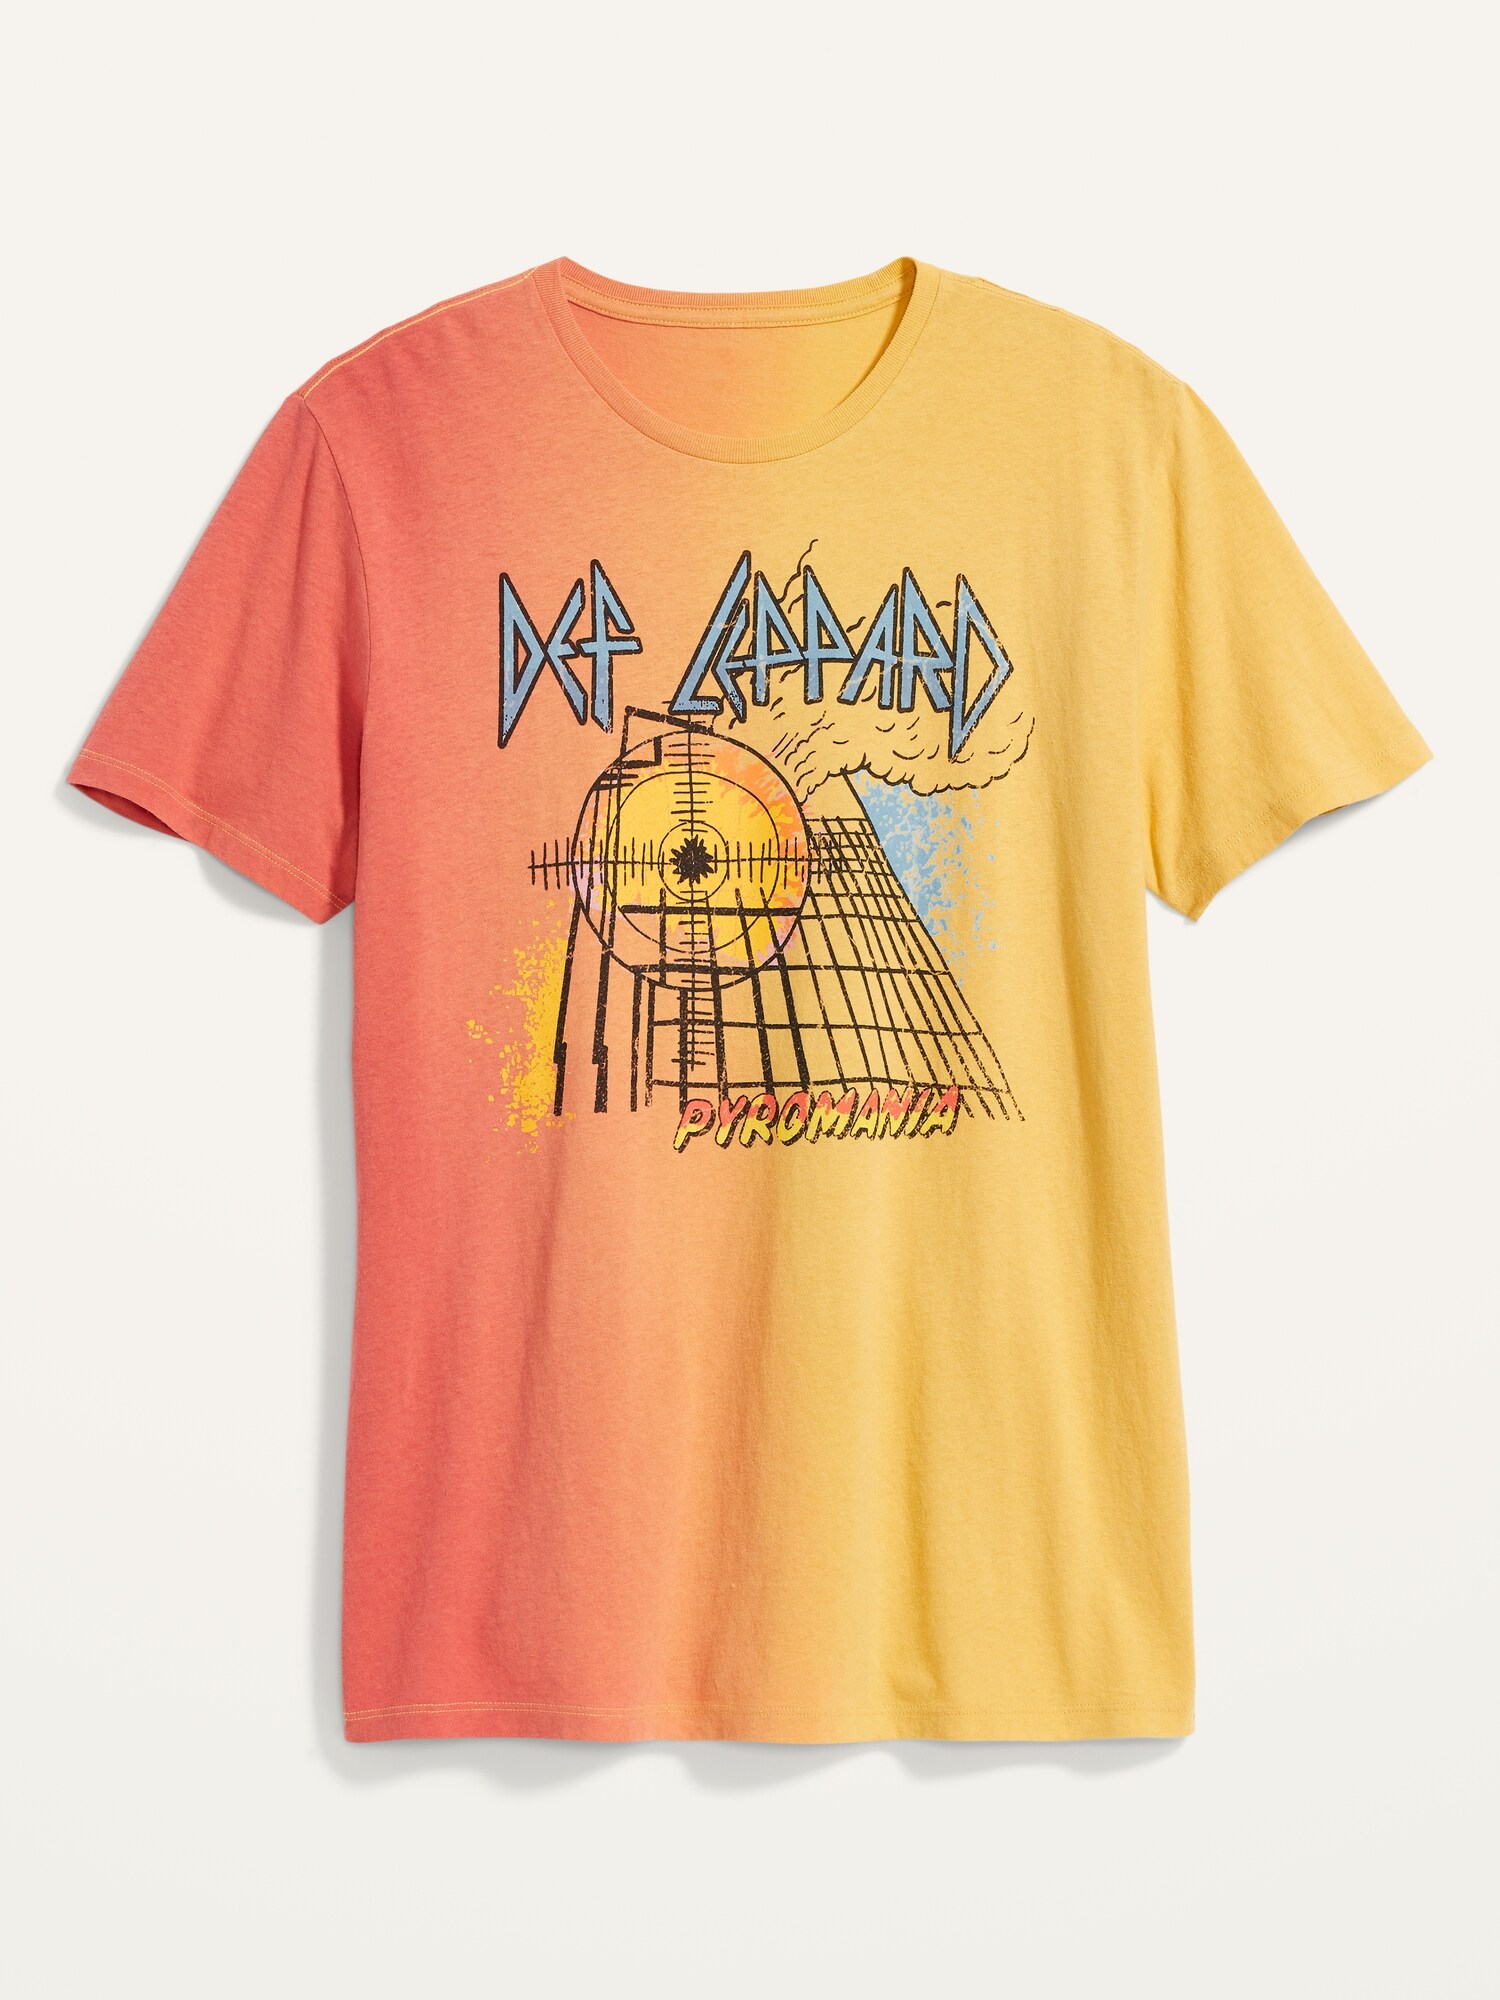 Def Leppard™ Oversized Dip-Dye Gender-Neutral T-Shirt for Adults | Old Navy